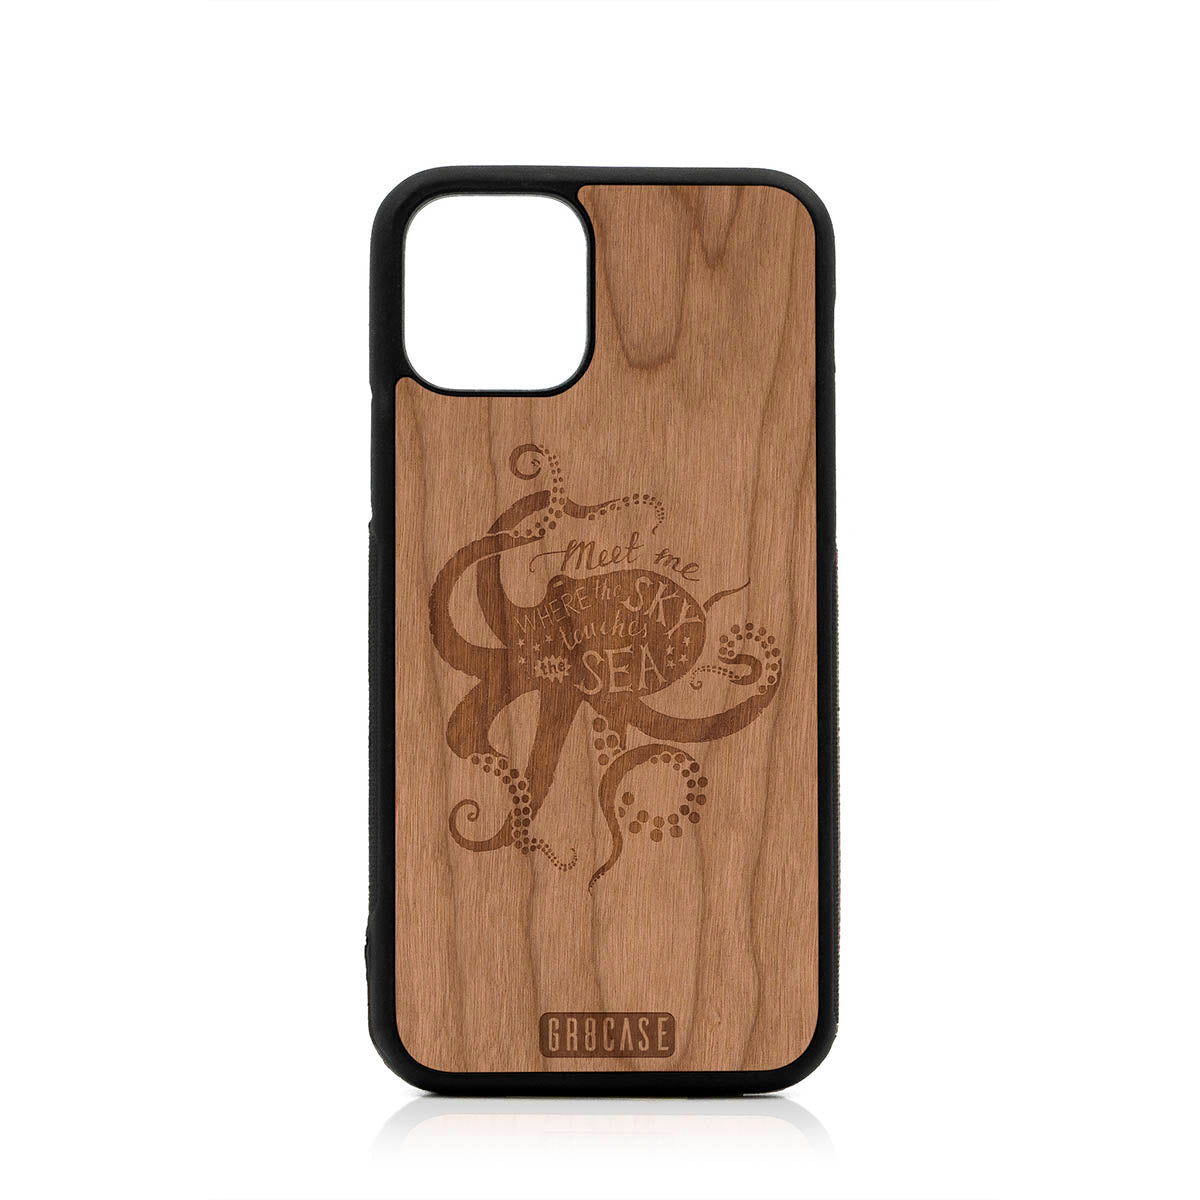 Meet Me Where The Sky Touches The Sea (Octopus) Design Wood Case For iPhone 11 Pro